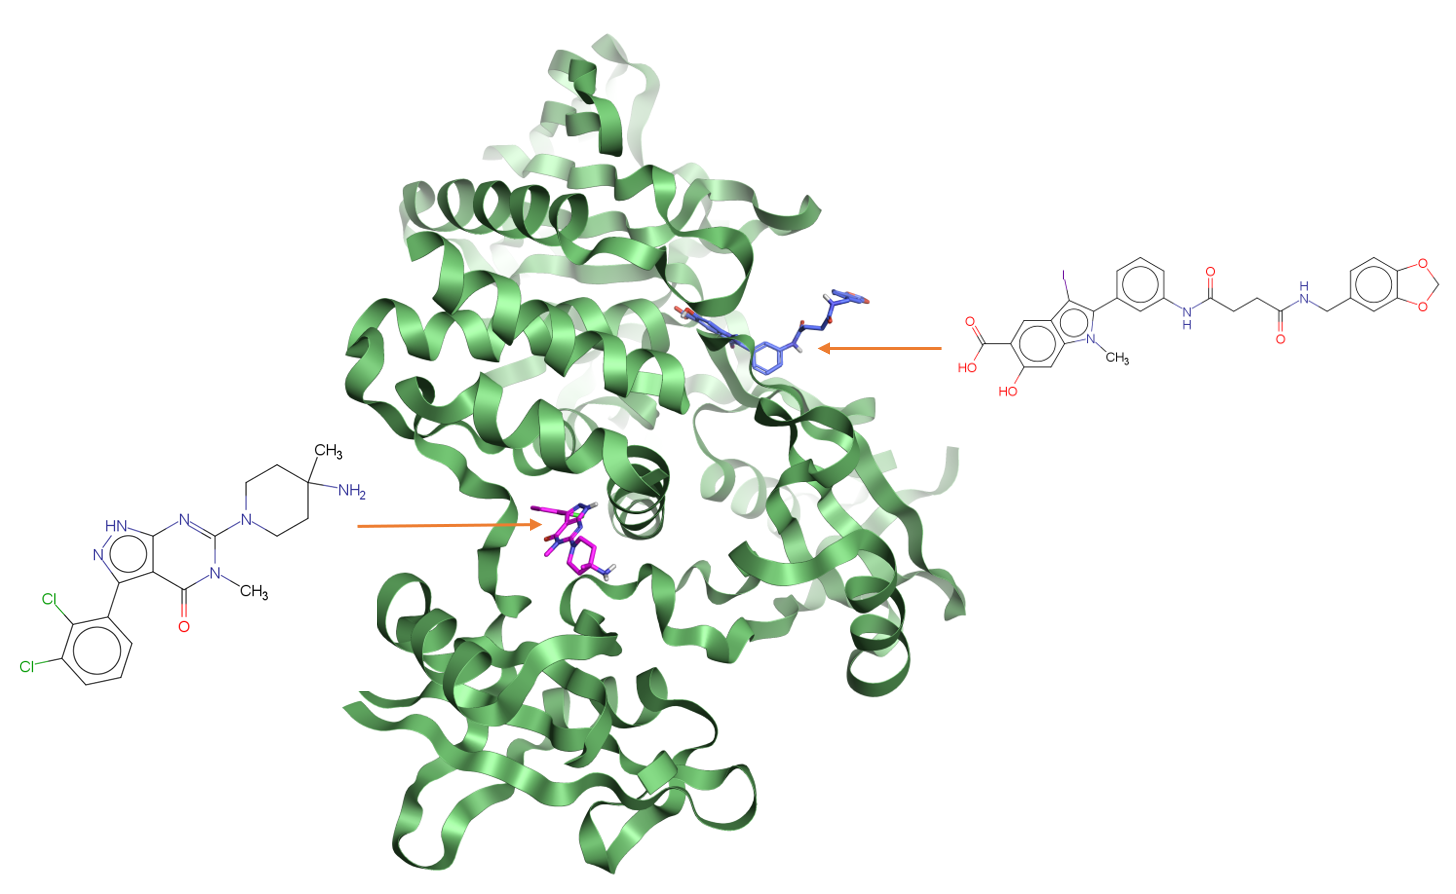 Phosphate binding site and allosteric binding site for Tyrosine-protein phosphatase non-receptor type 11